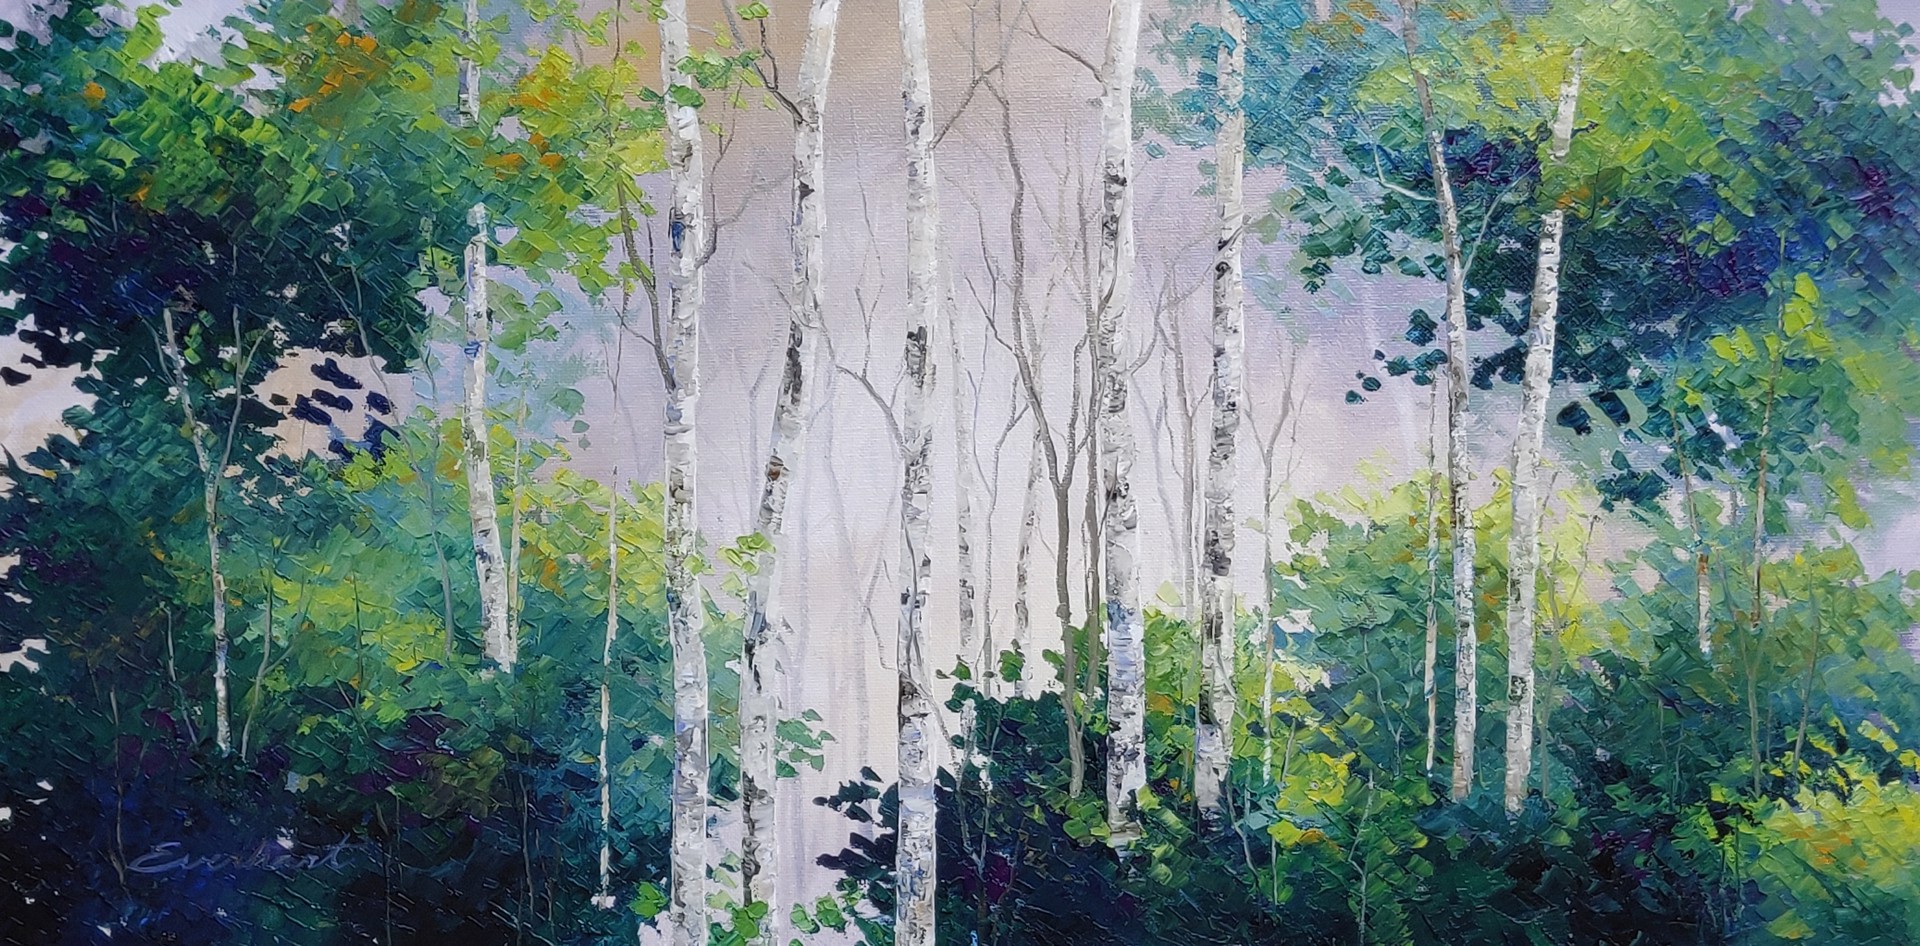 Alone In The Aspens by Amy Everhart